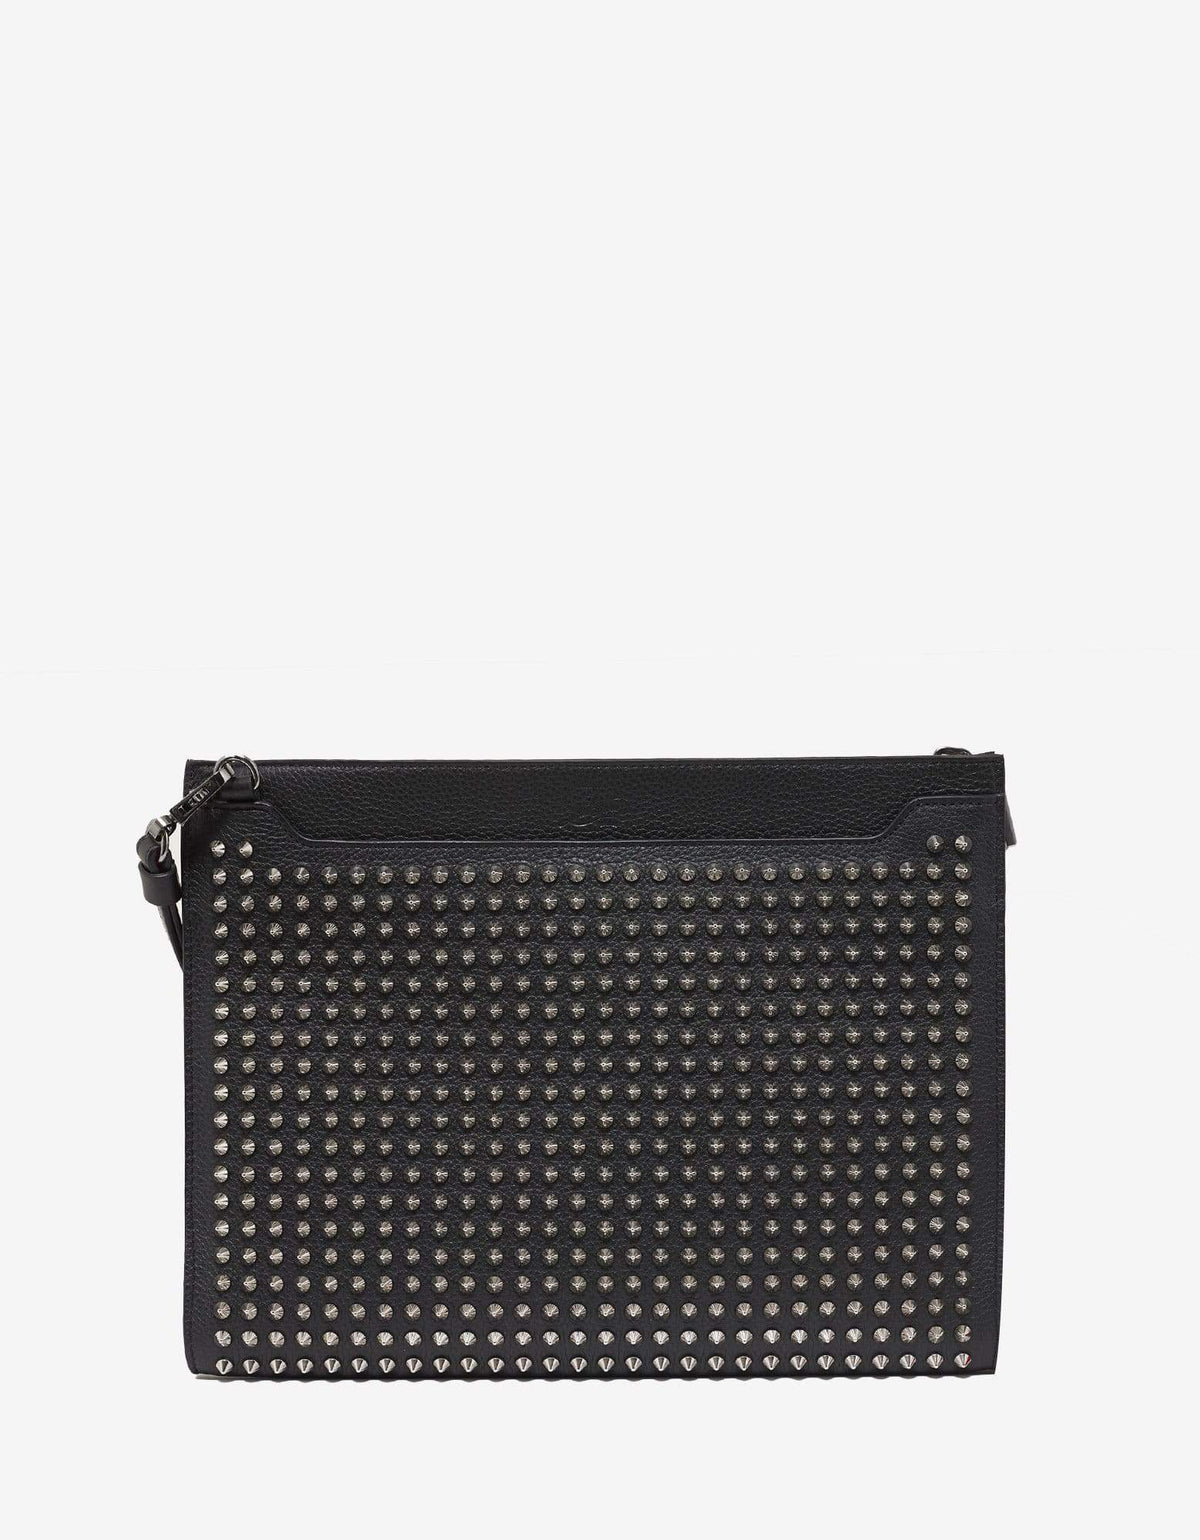 Christian Louboutin Skypouch Black Leather Bag with Silver Spikes -